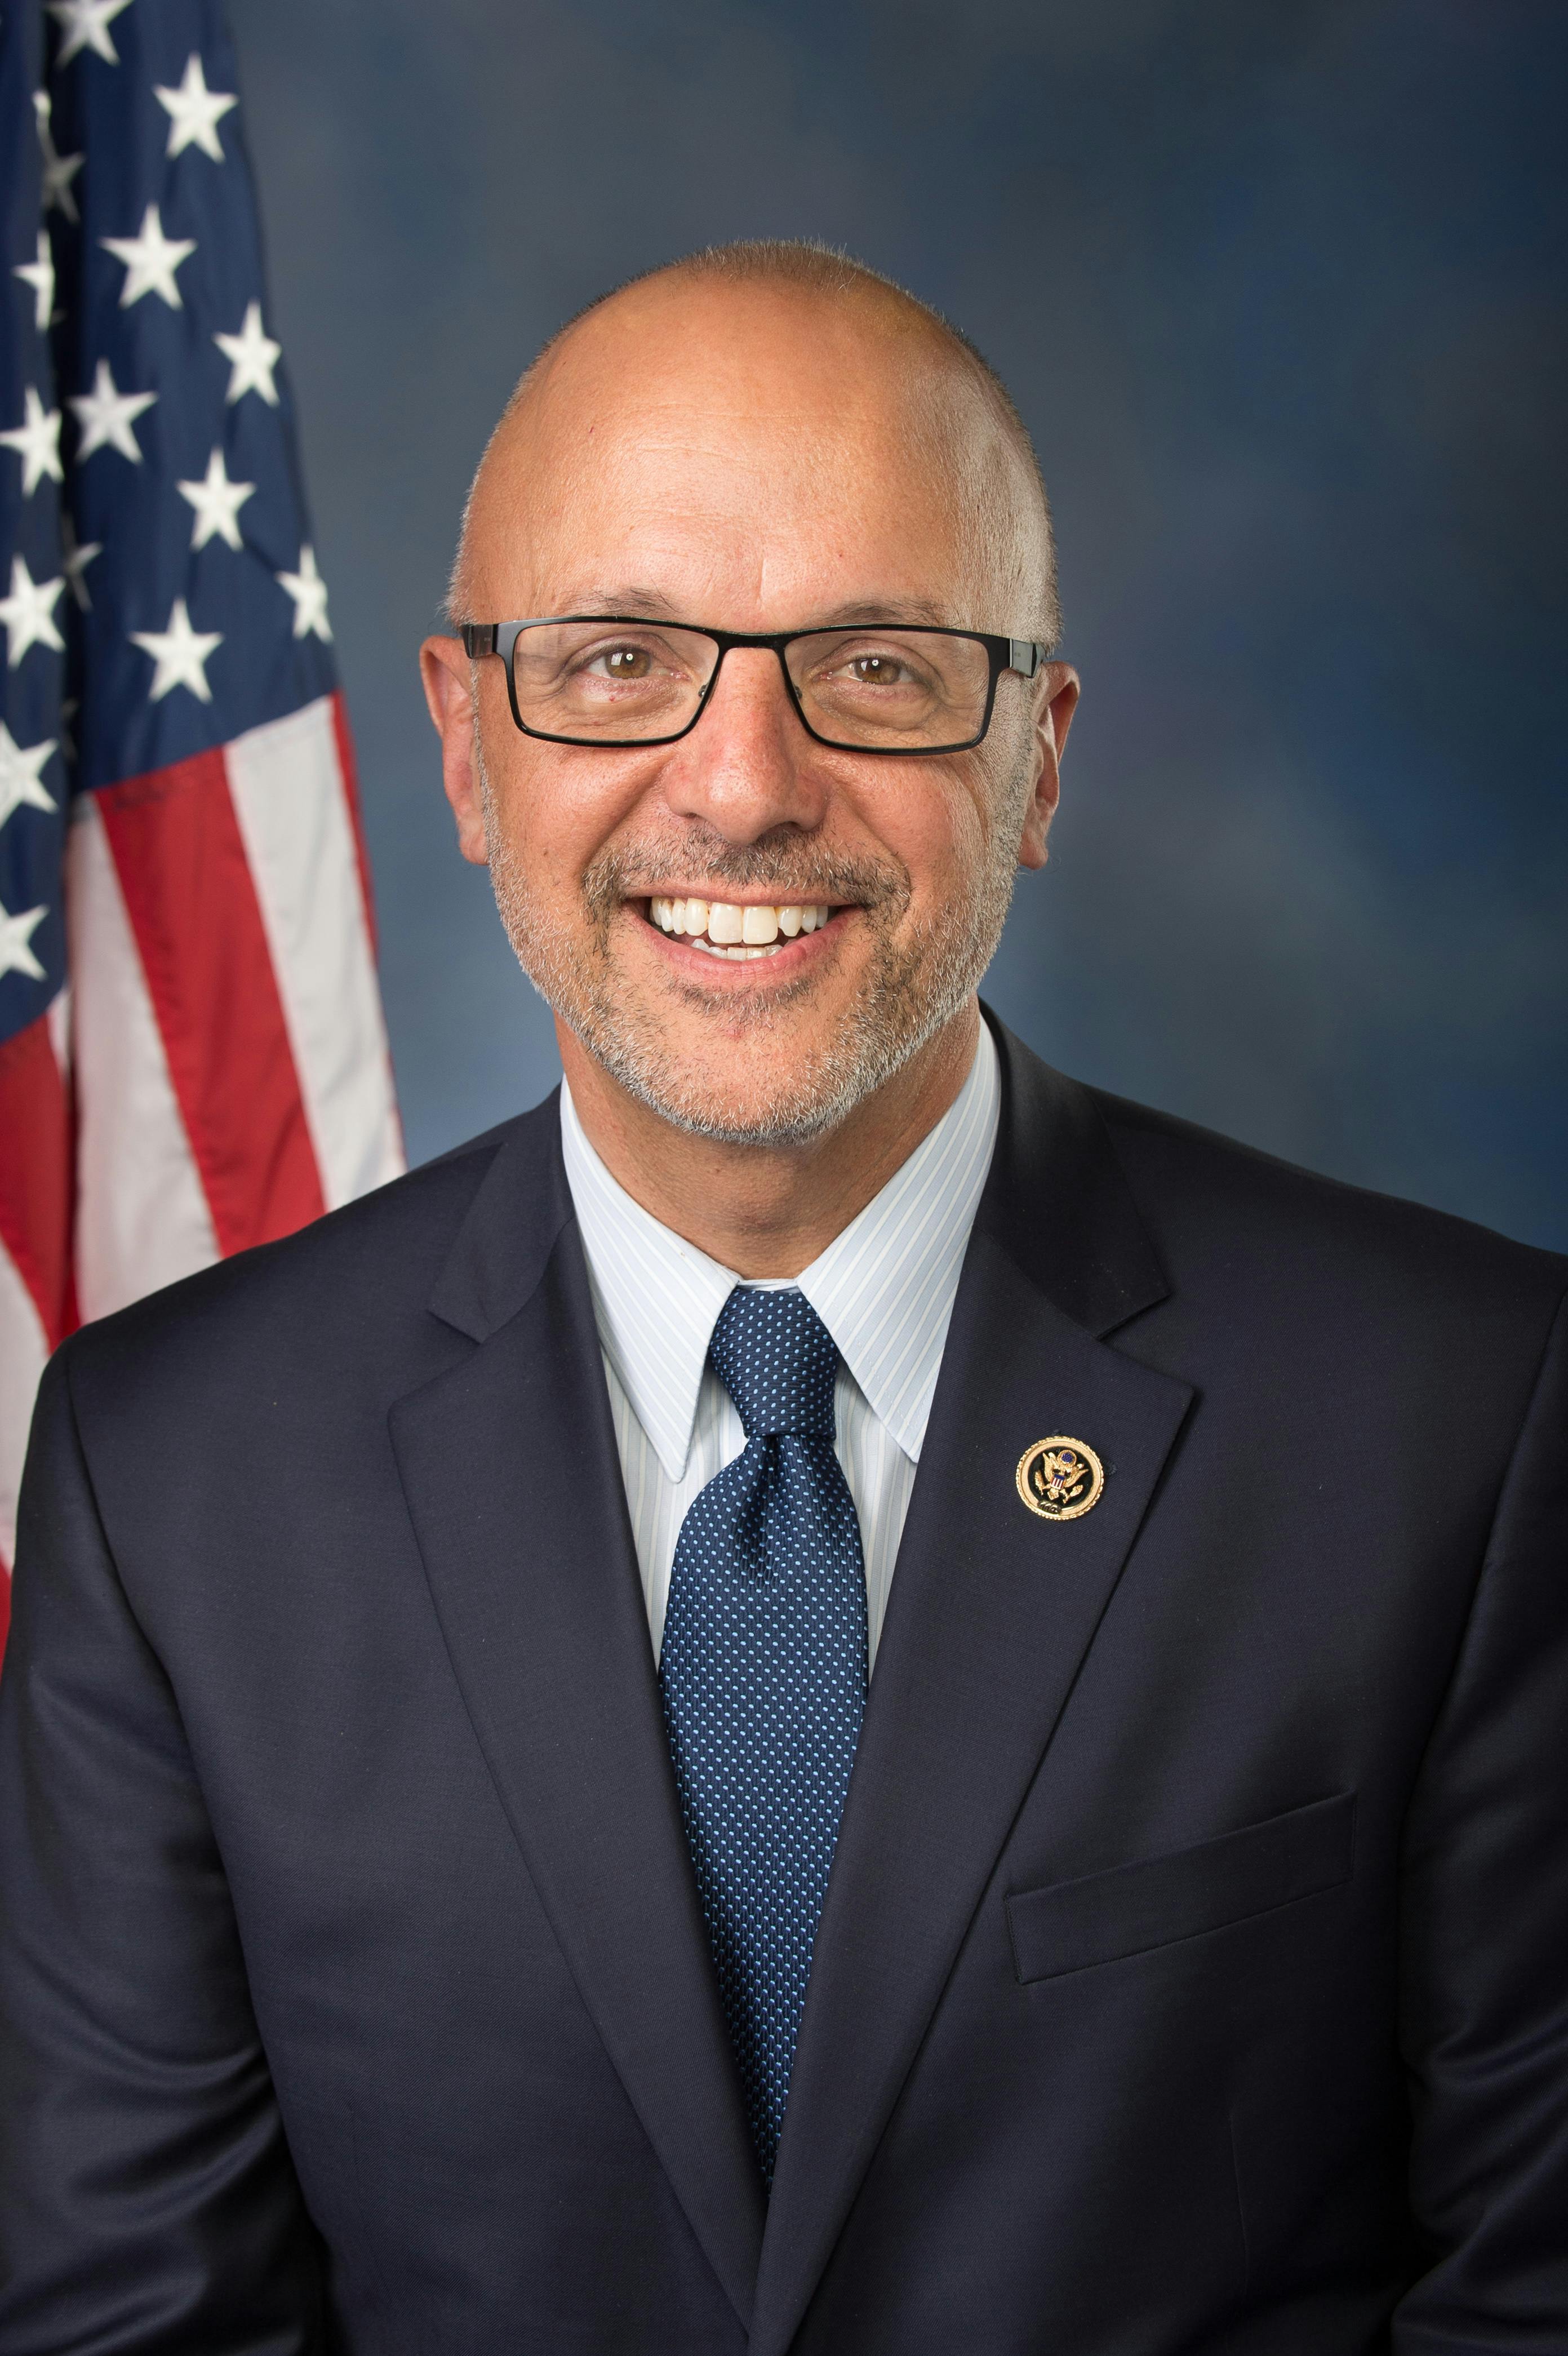 Profile picture of Ted Deutch